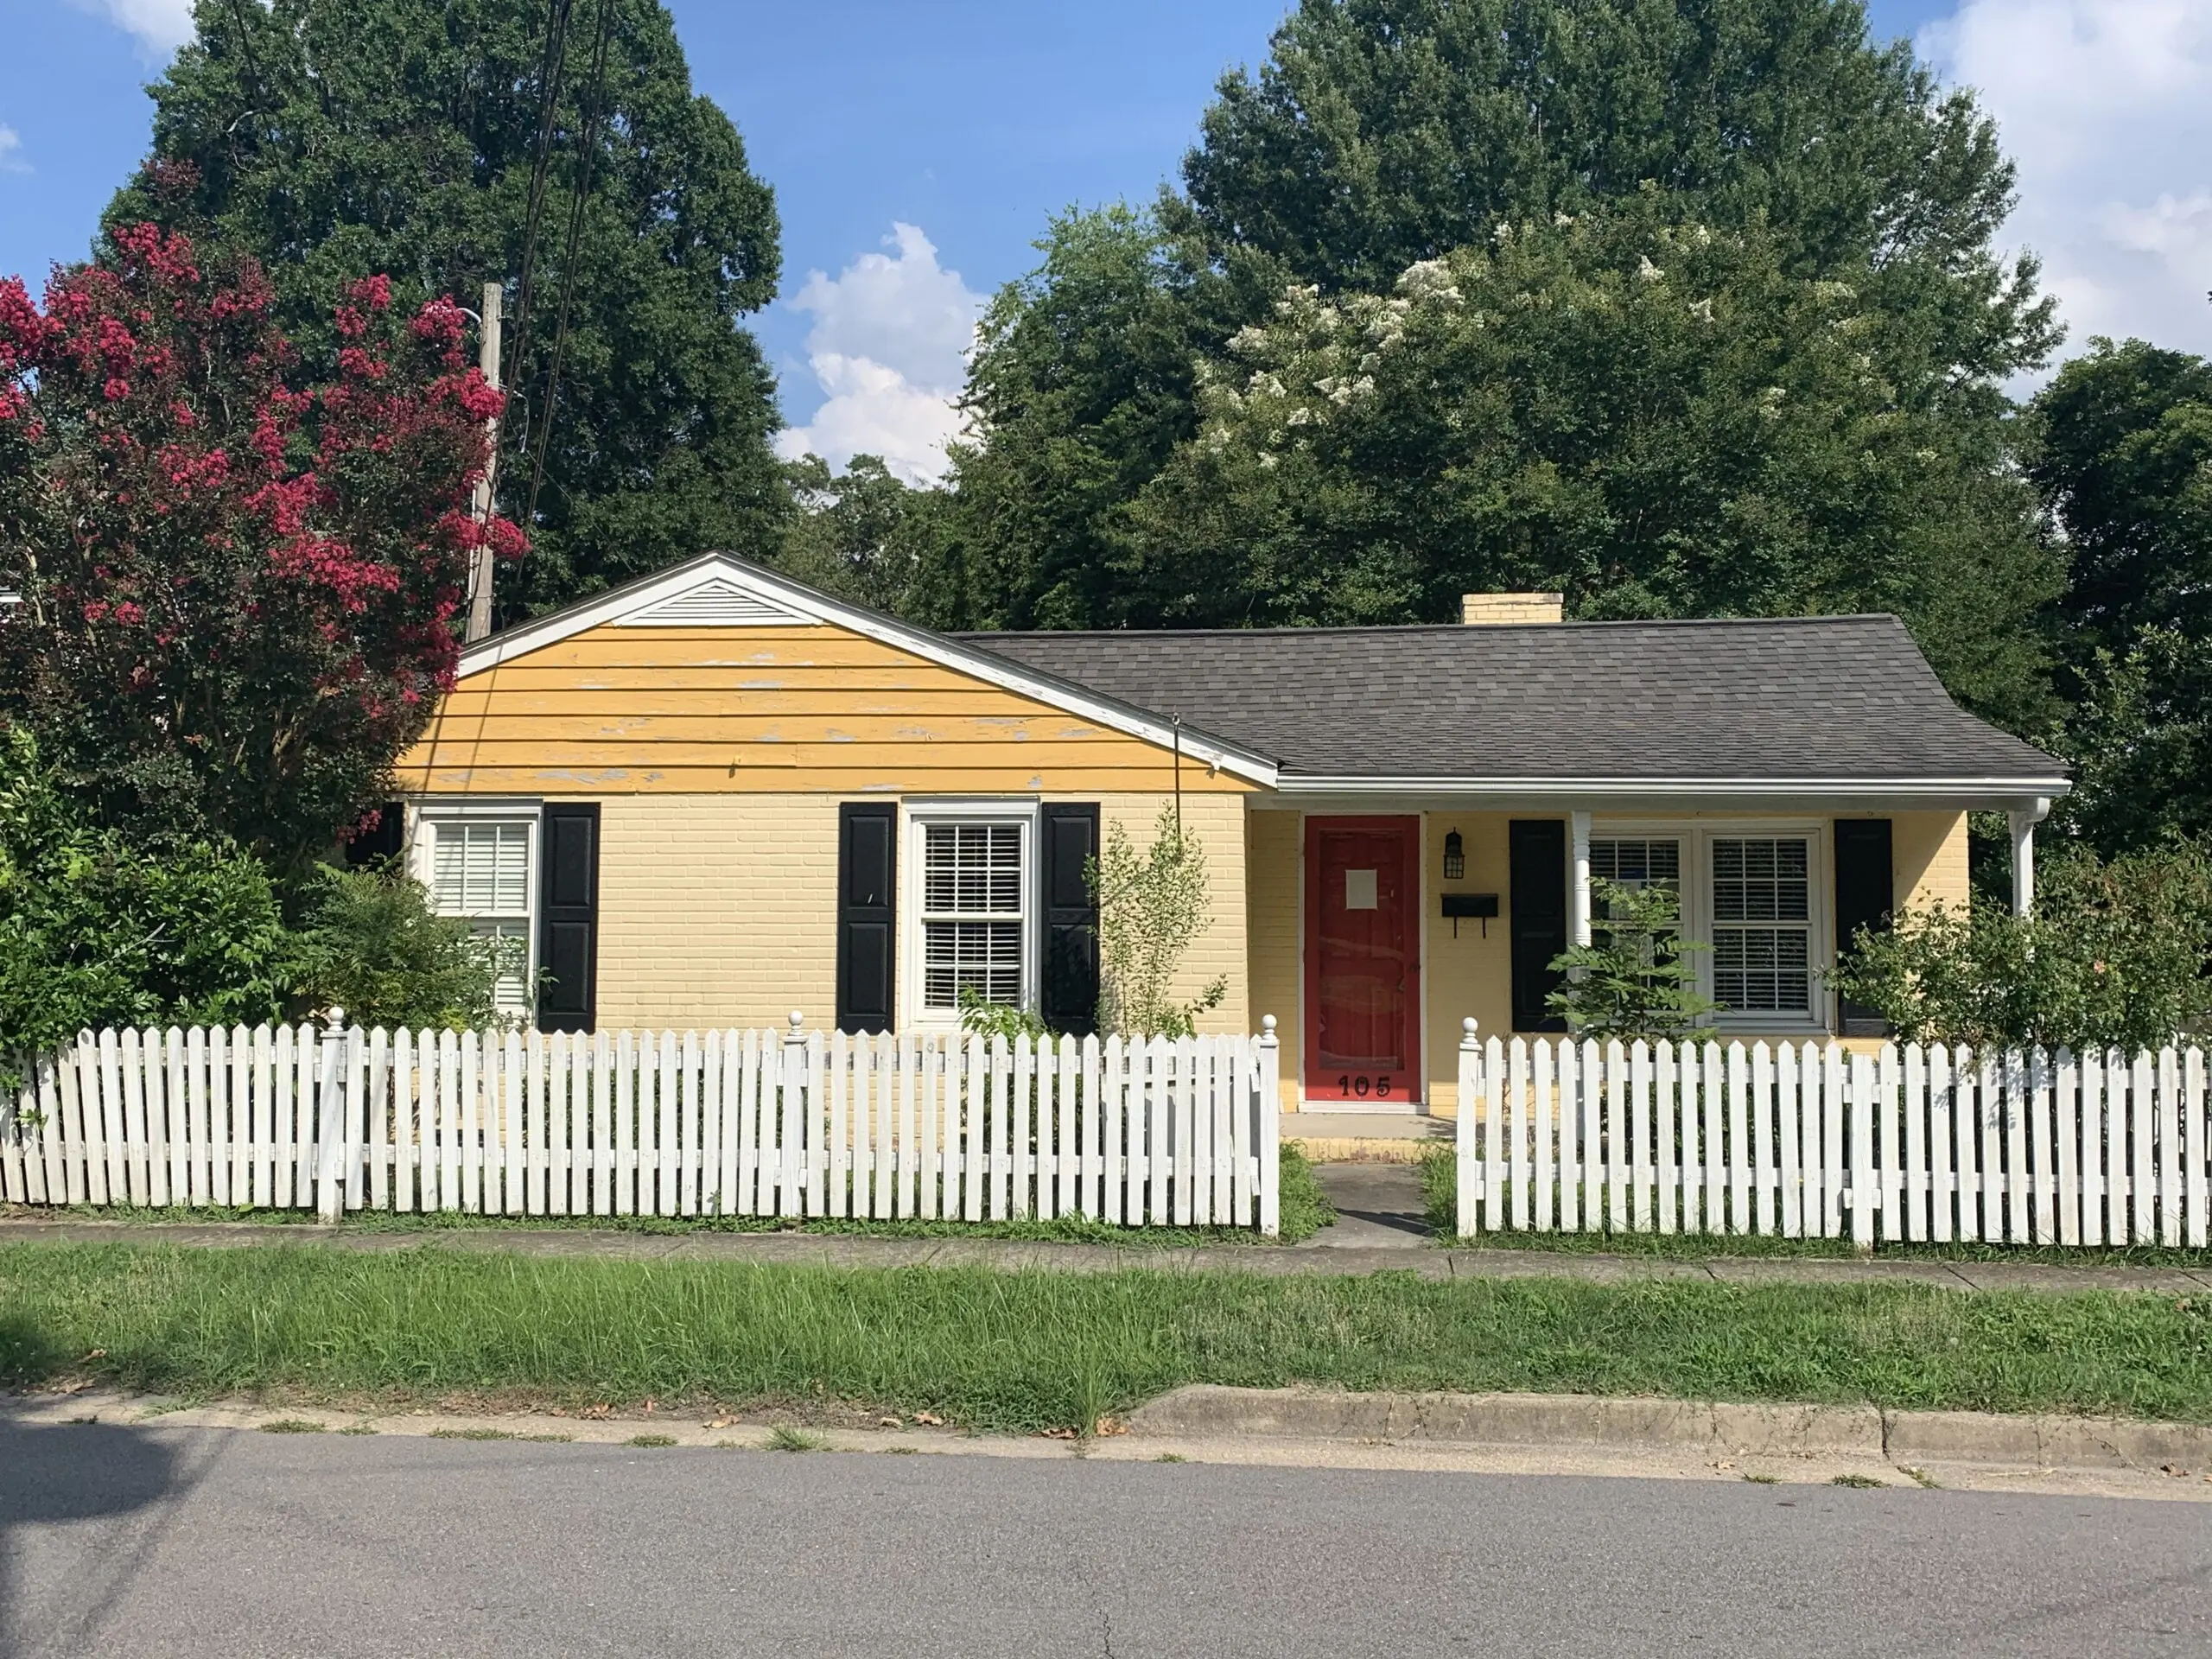 a yellow house with a white picket fence